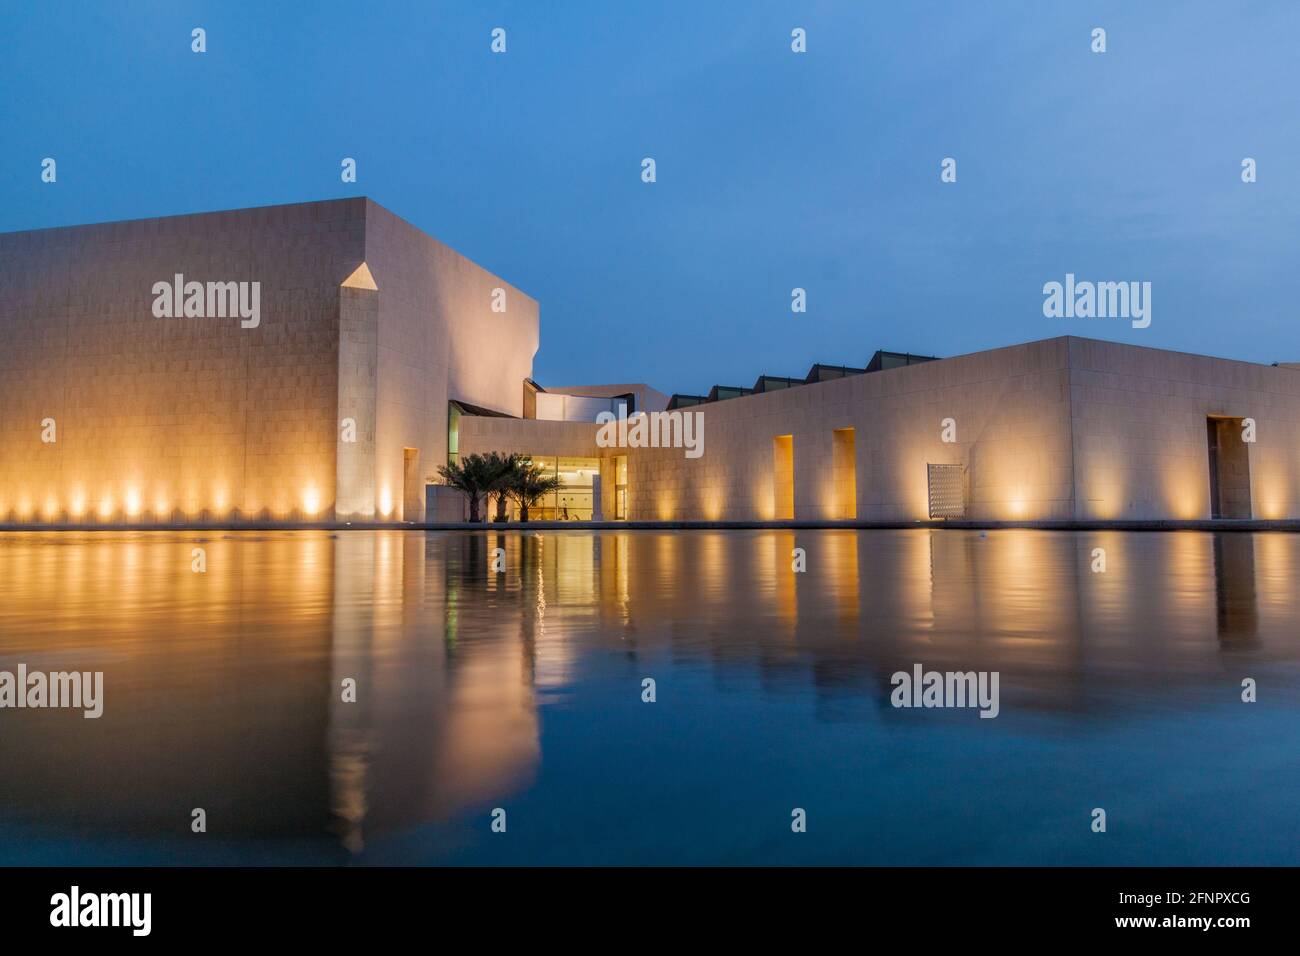 MANAMA, BAHRAIN - MARCH 15, 2017: View of Bahrain National Museum reflecting in a pond. Stock Photo